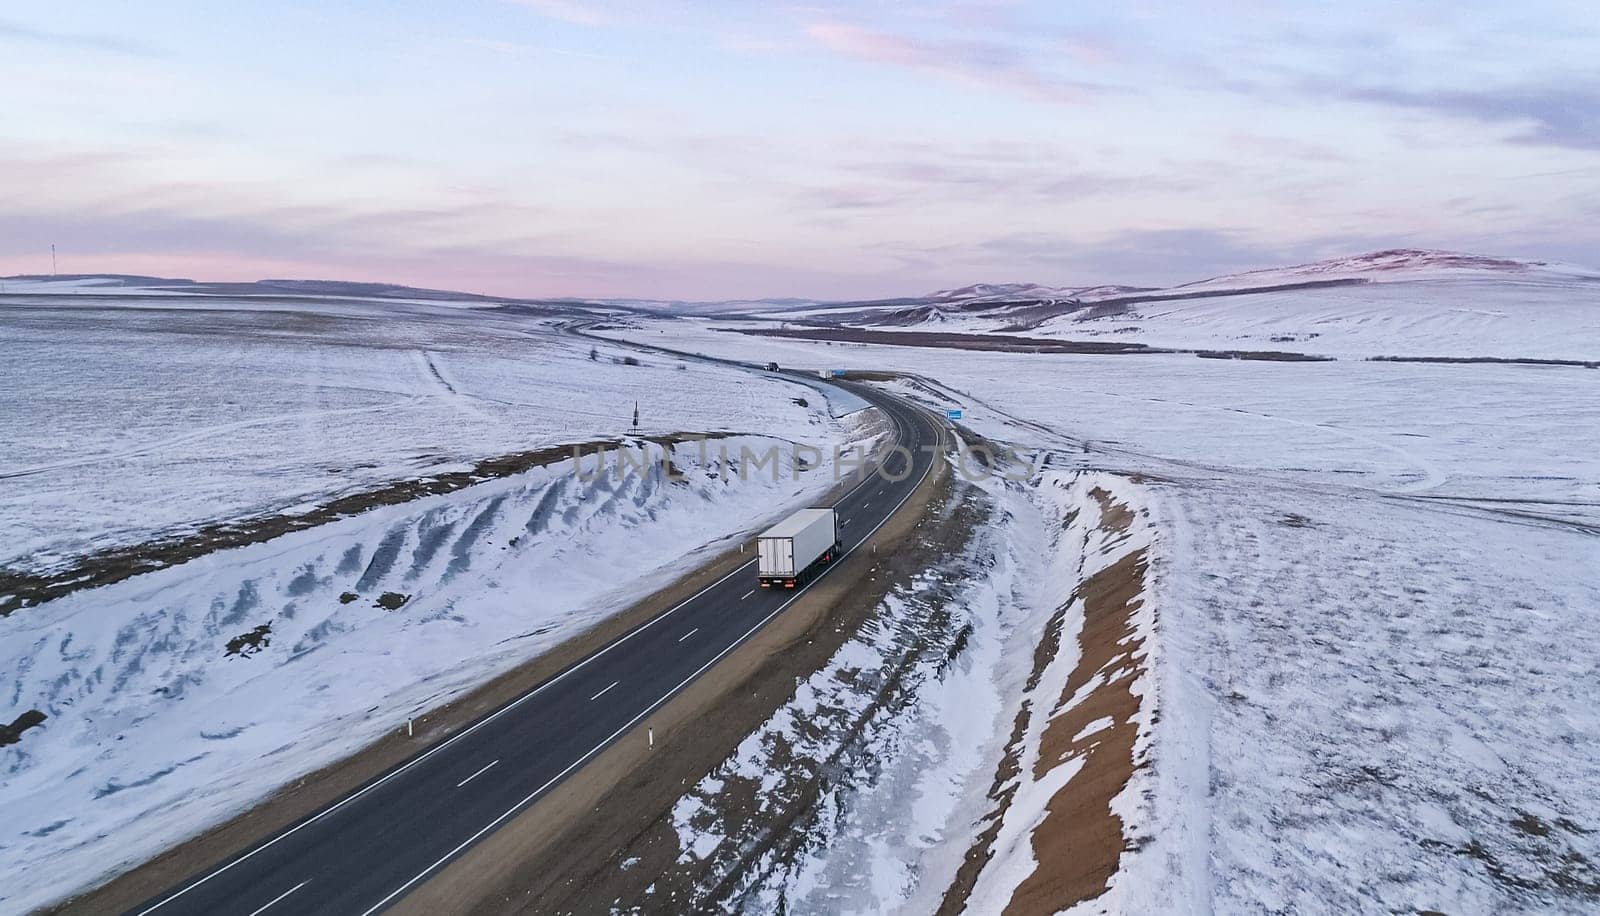 Lonely semi truck driving on snowy rural highway at dusk in winter landscape by Busker